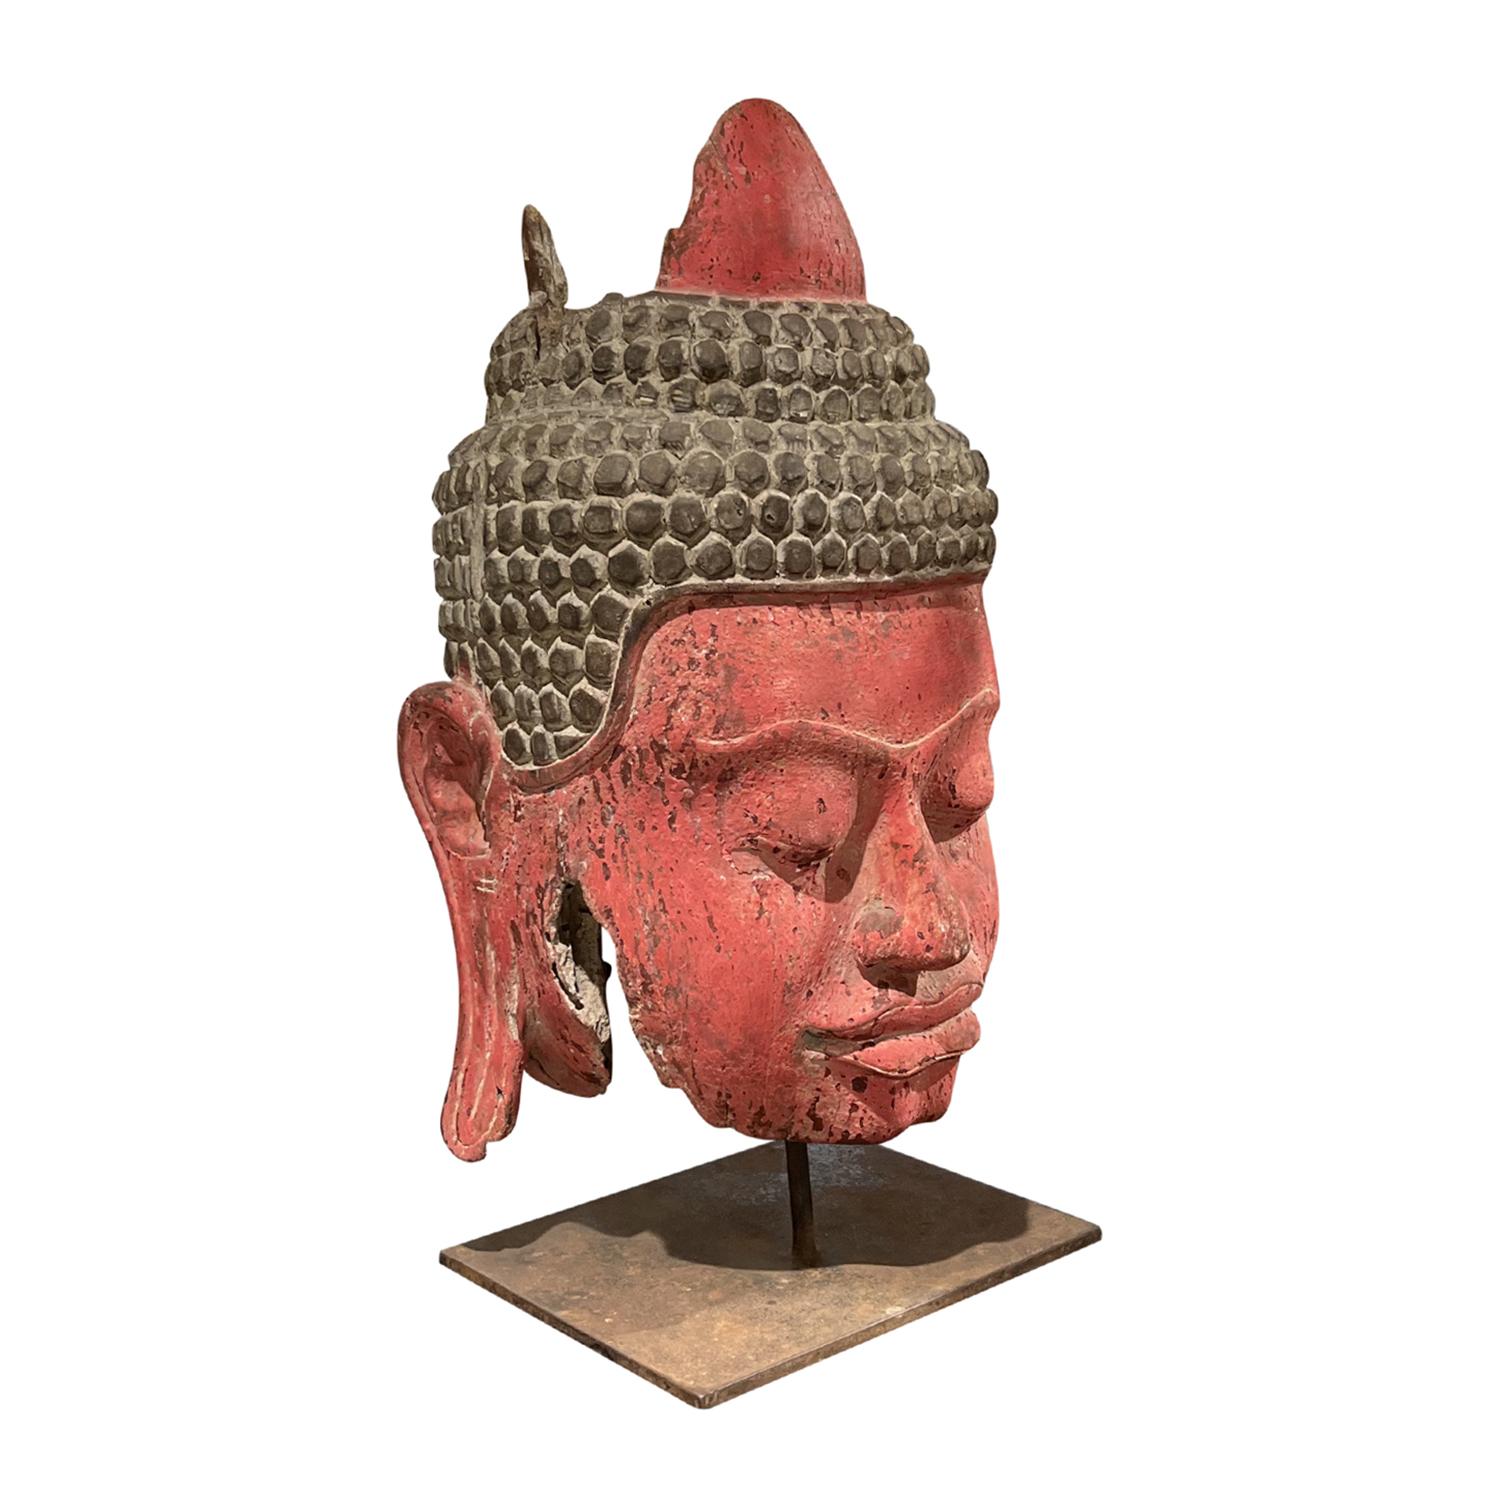 A 19th Century, very decorative large Burmese Buddha head made of hand crafted painted Pinewood, in good condition. The red patinated décor piece is elevated on a square metal base, enhanced by detailed wood carvings. Wear consistent with age and